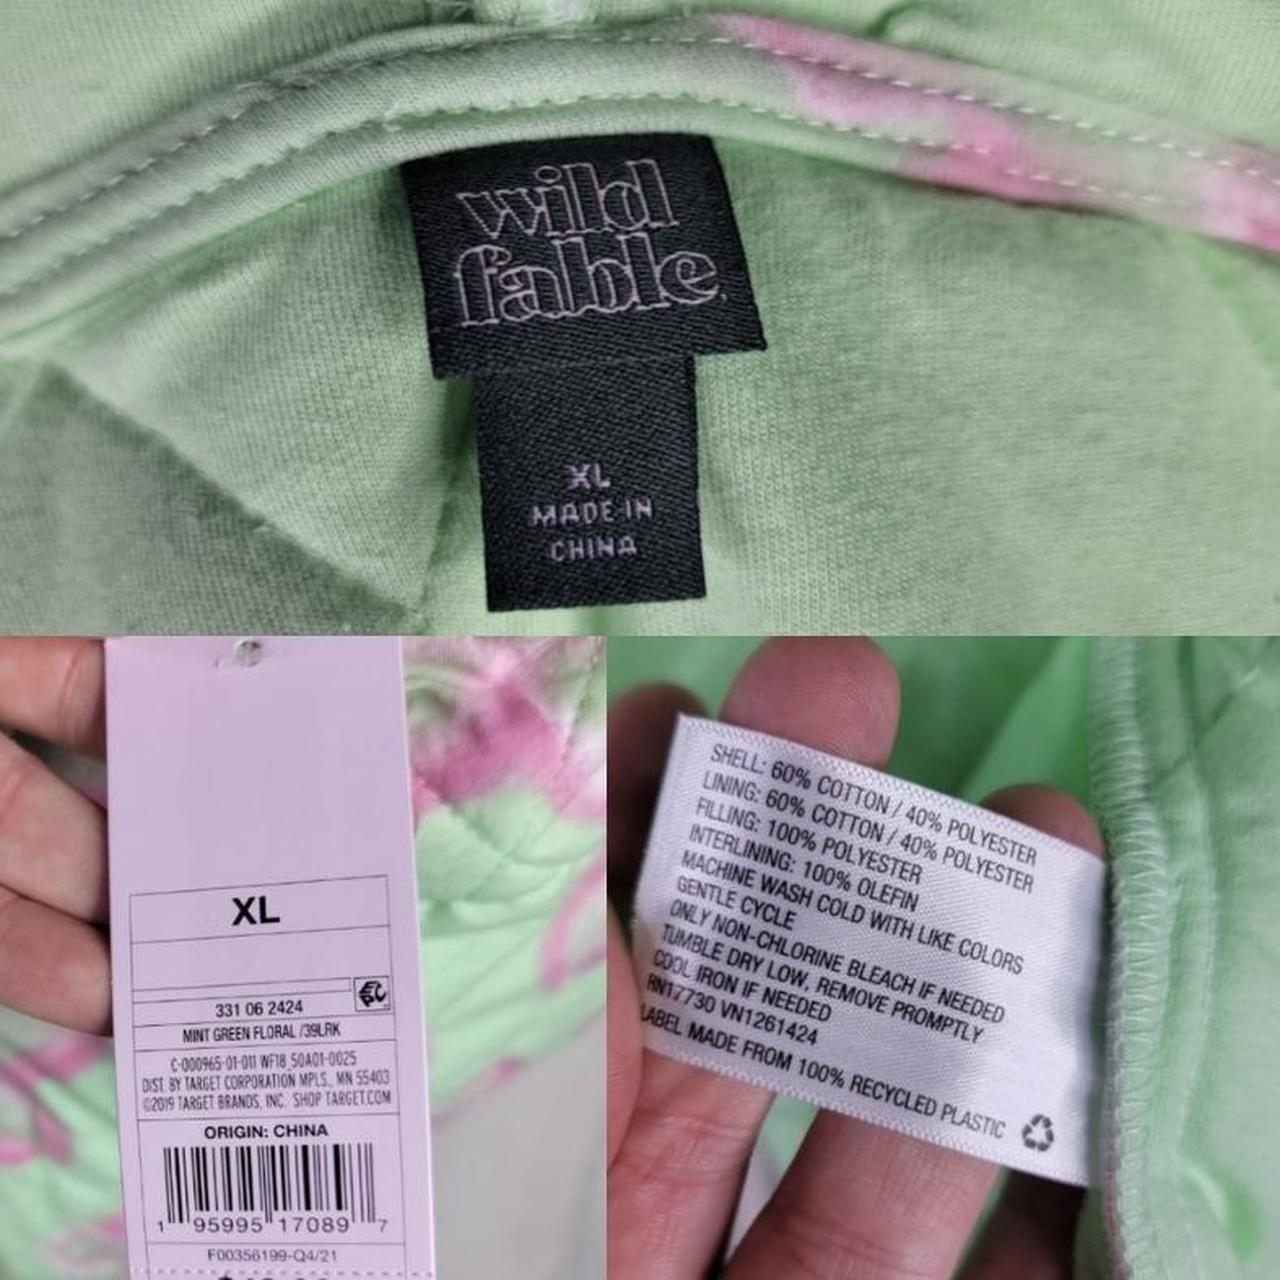 Wild Fable Women's Green and Pink Jacket (4)